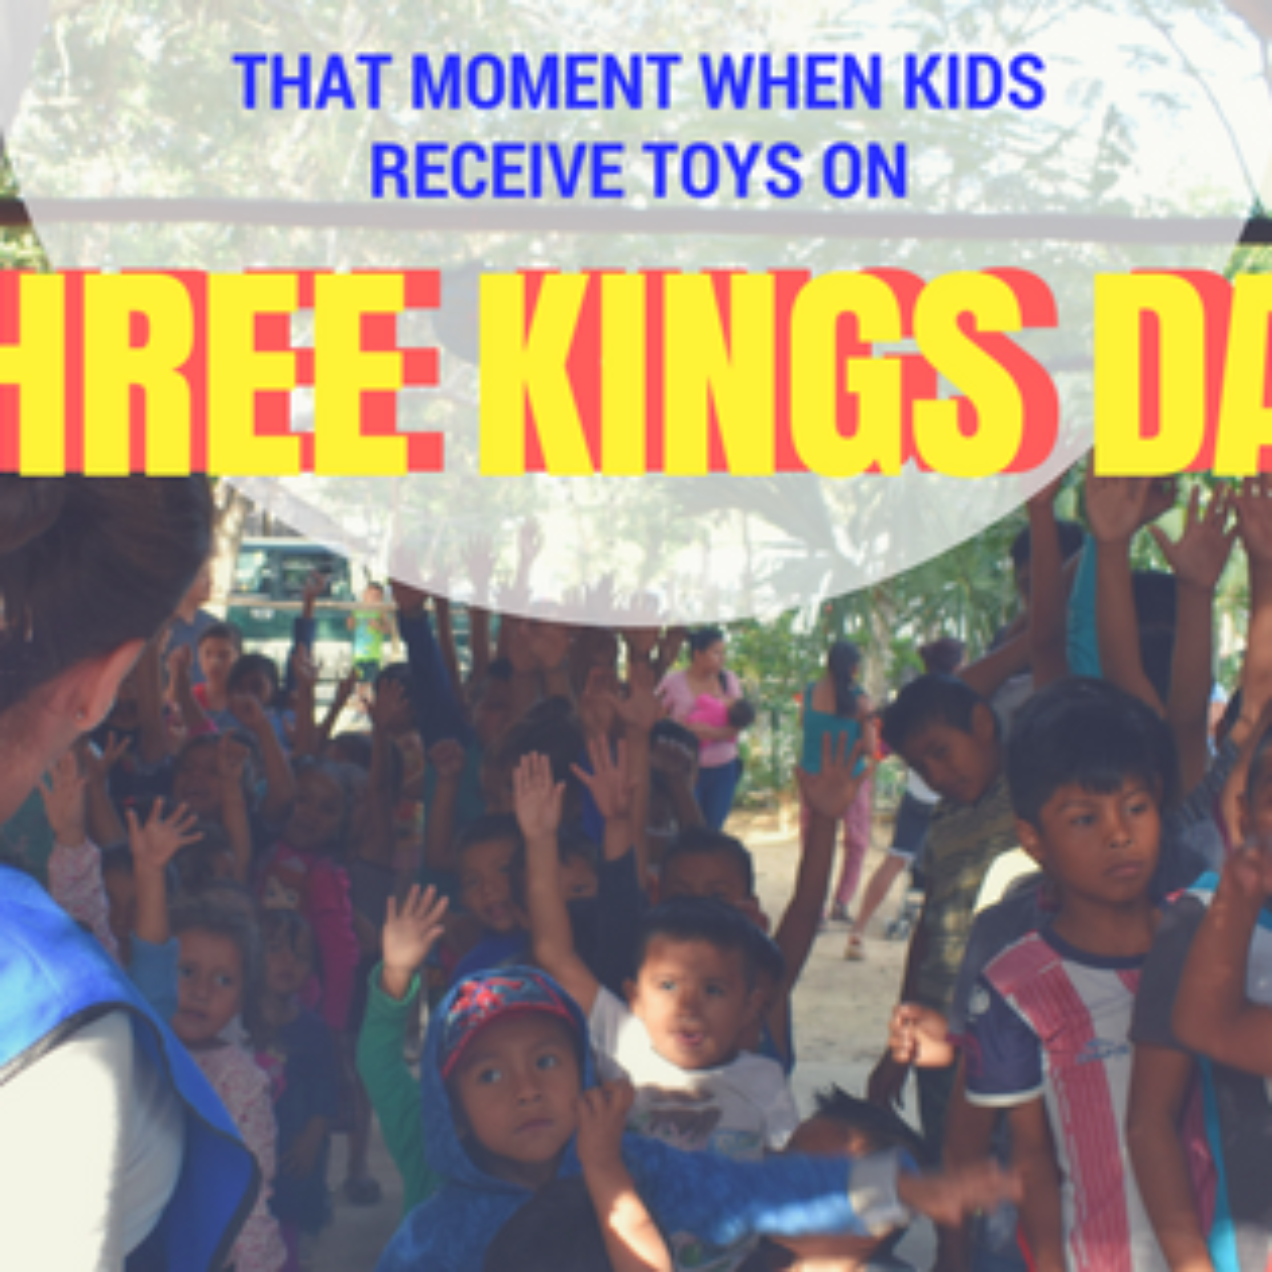 That Moment When Kids Receive Toys on Three Kings Day